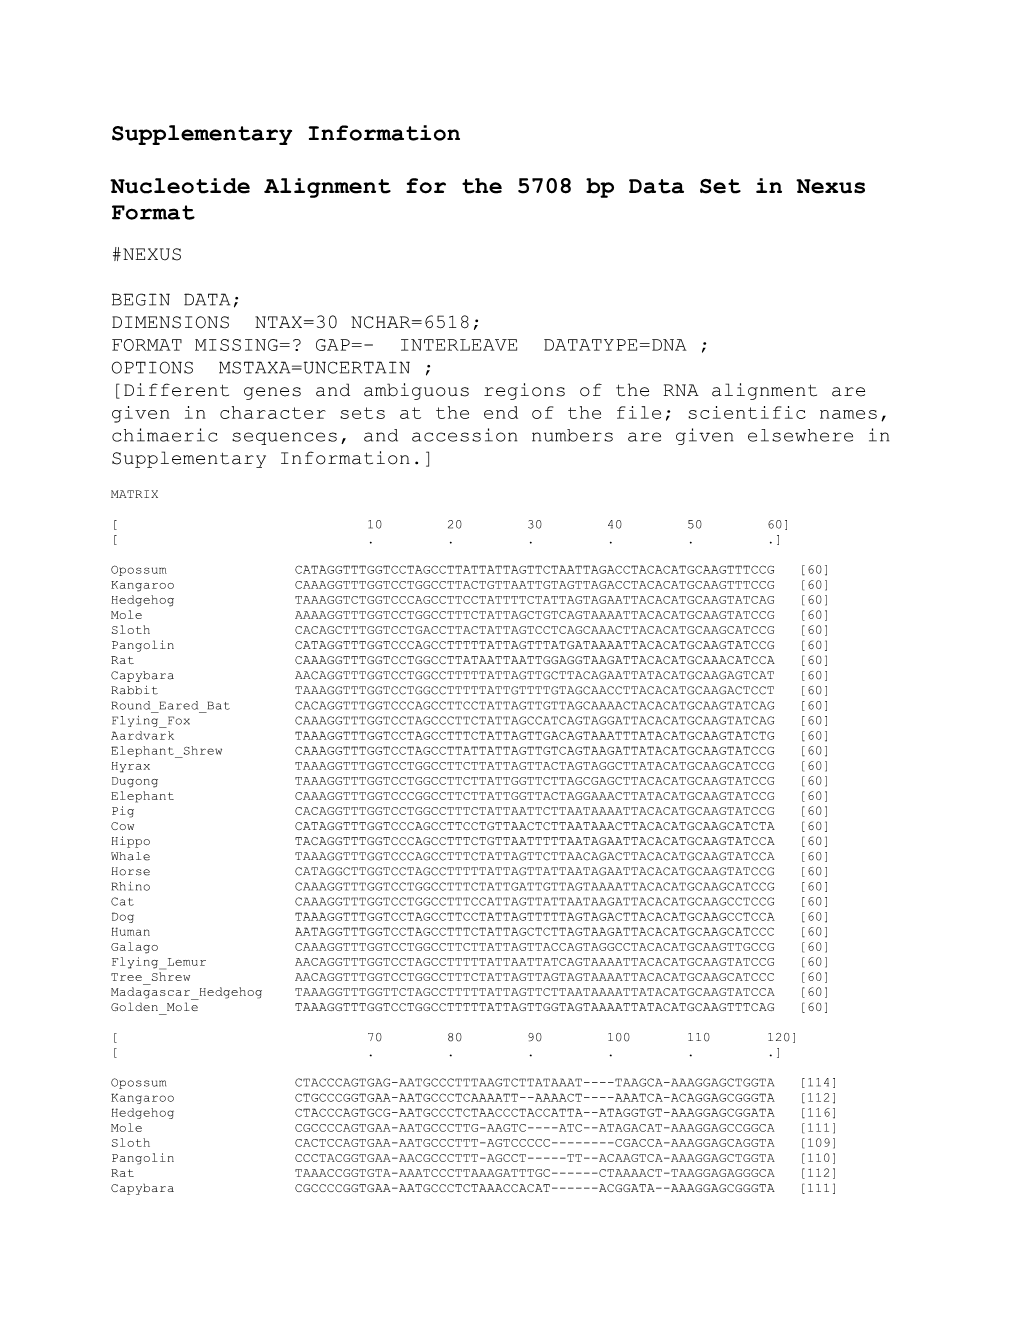 Nucleotide Alignment for the 5708 Bp Data Set in Nexus Format